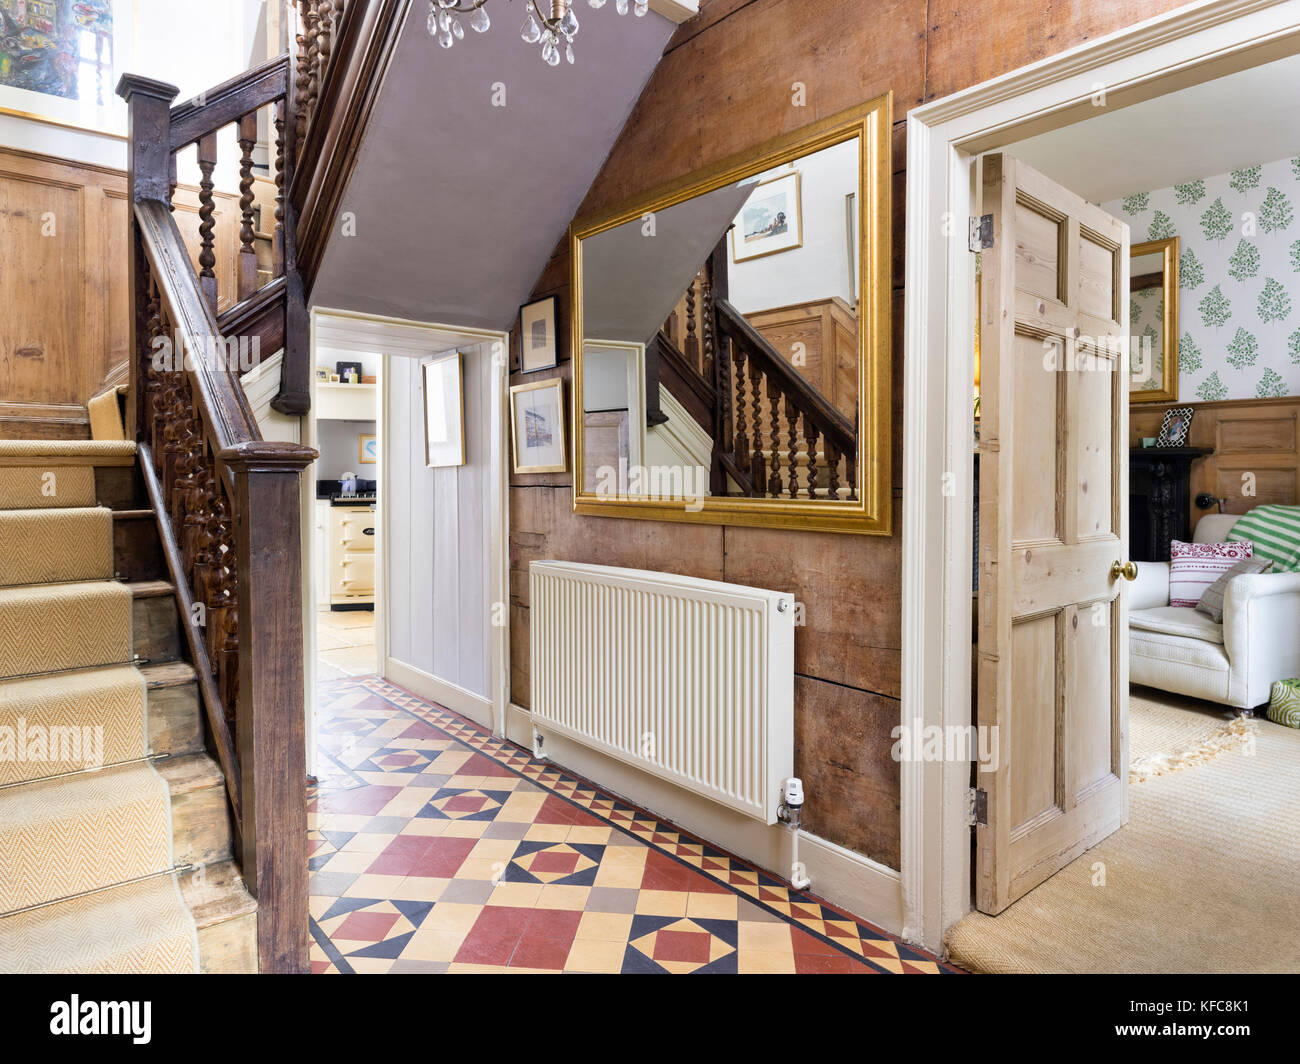 The entrance hall & staircase of a period cottage. Showing a view in to the kitchen & parlour. Stock Photo